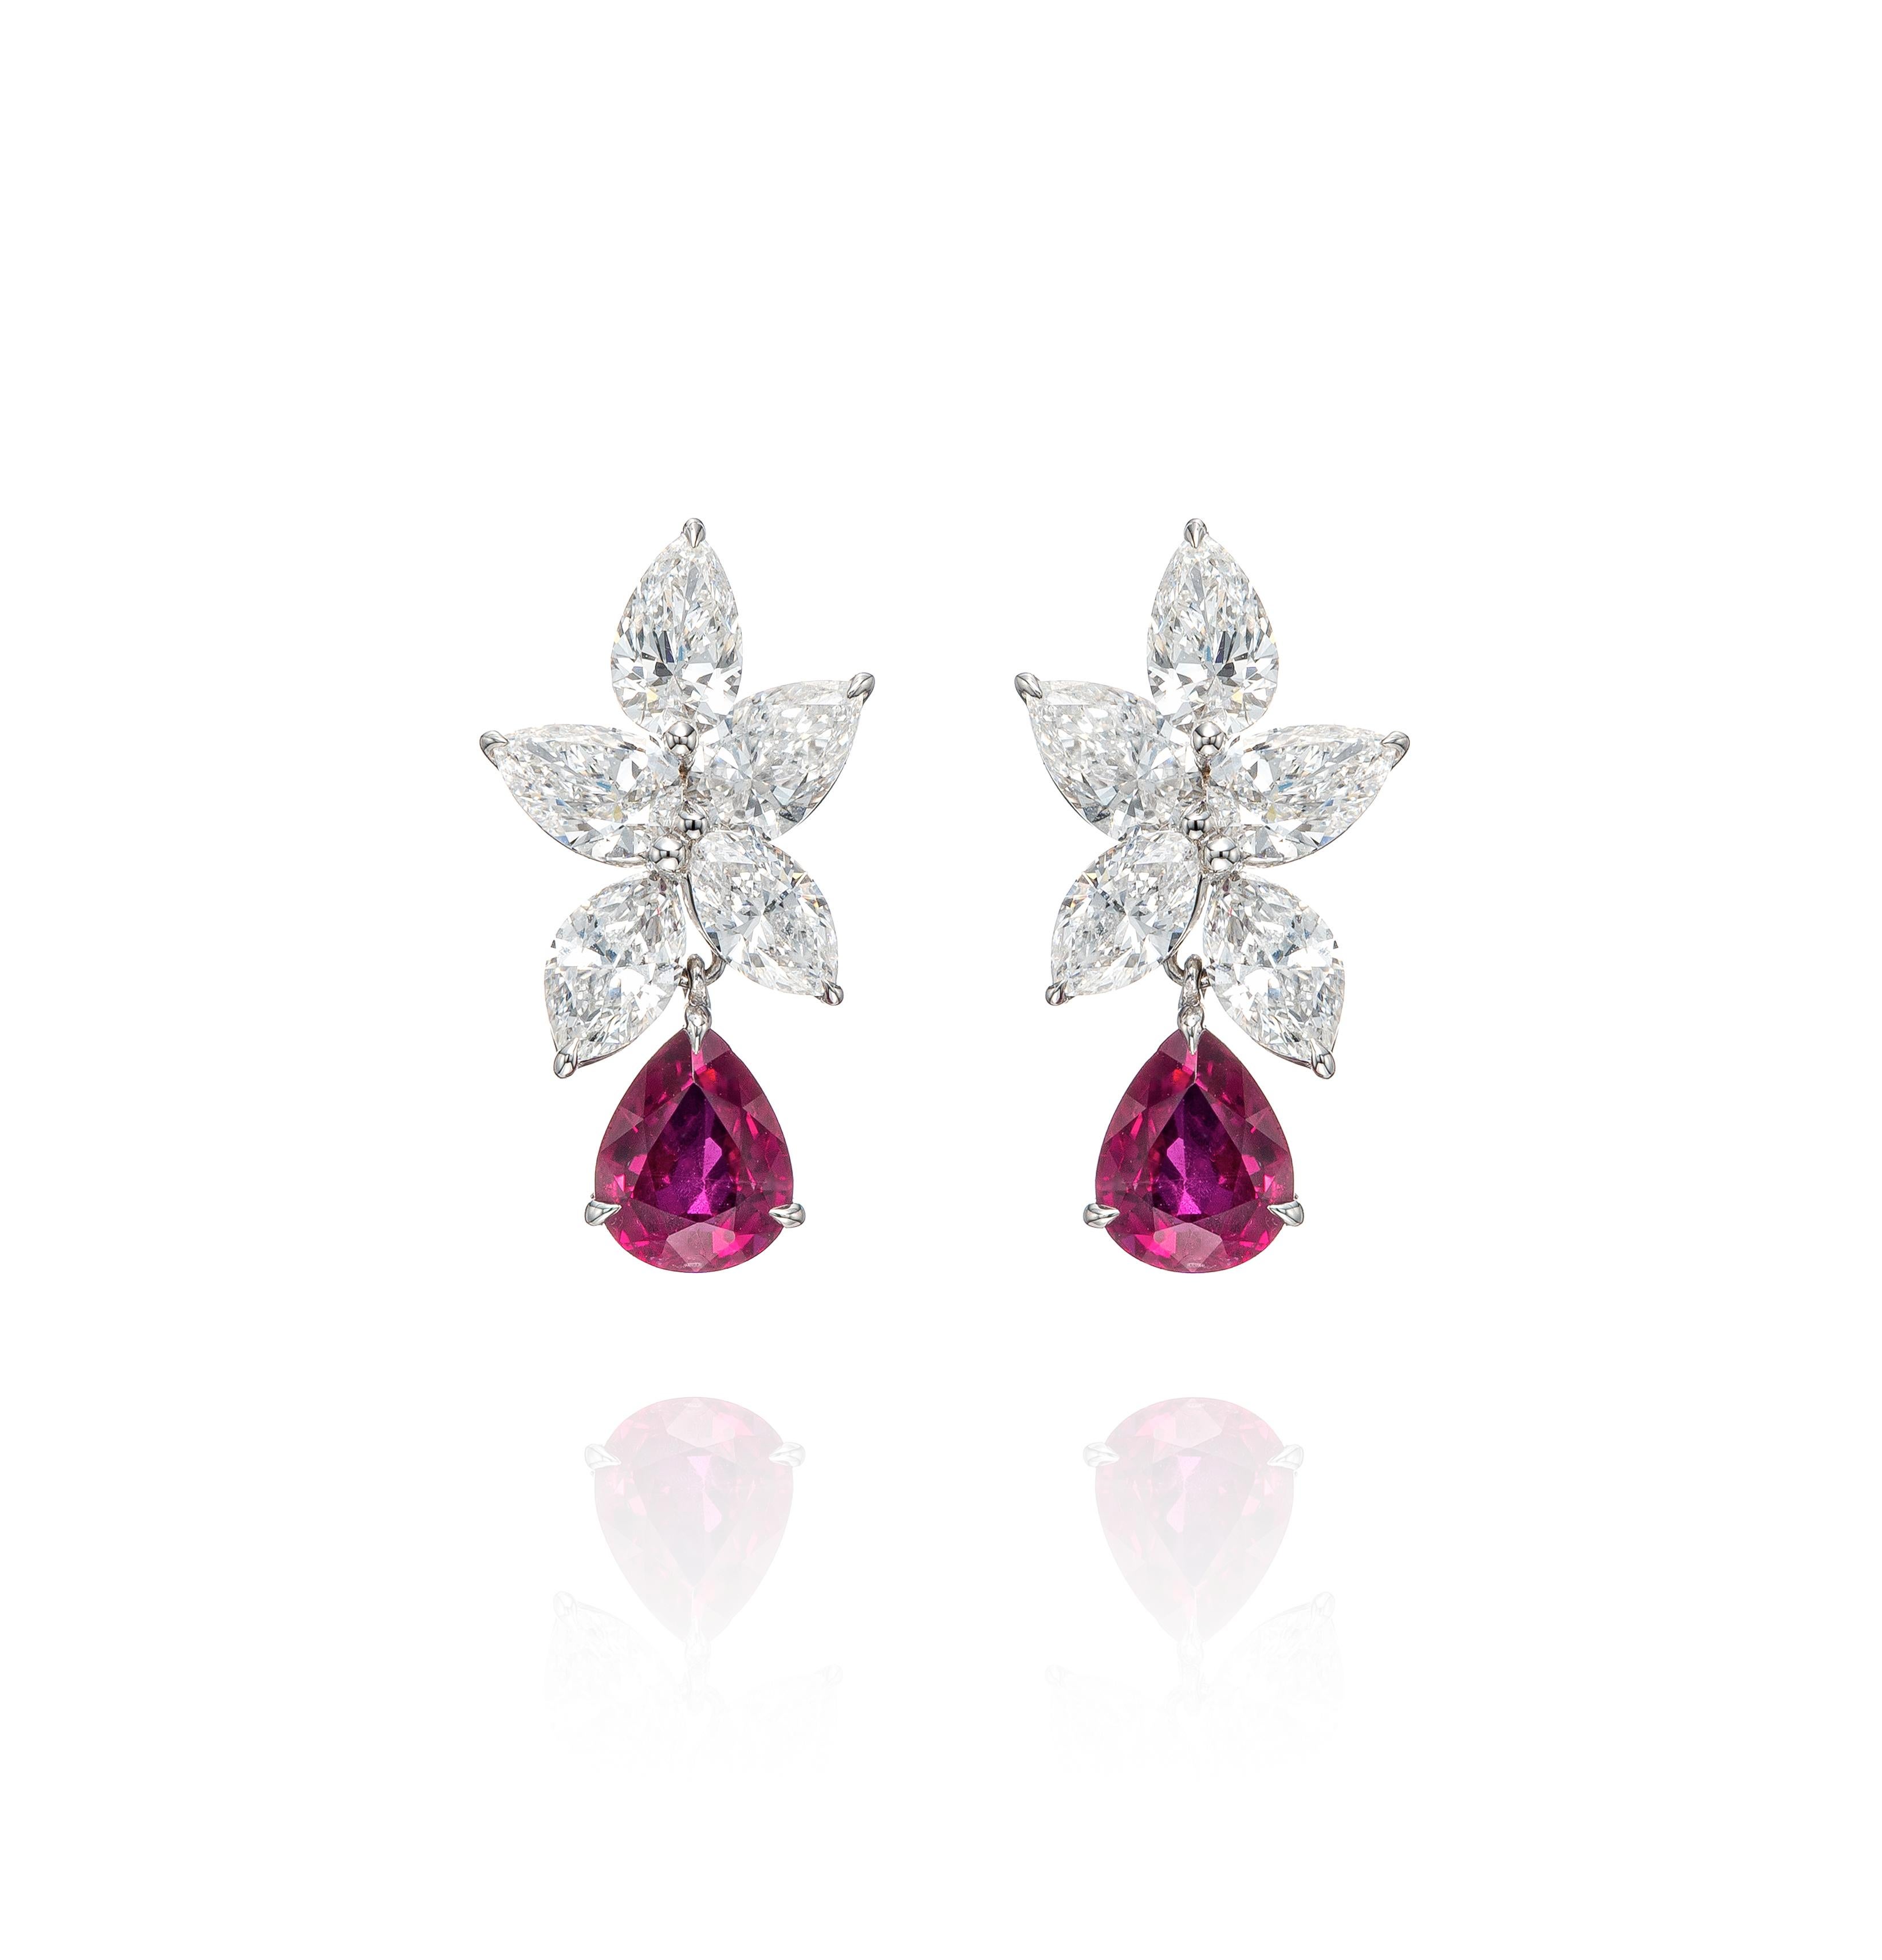 Contemporary 3.08 Carat Pear Shape Ruby and Diamond Cluster Earrings in 18K White Gold For Sale